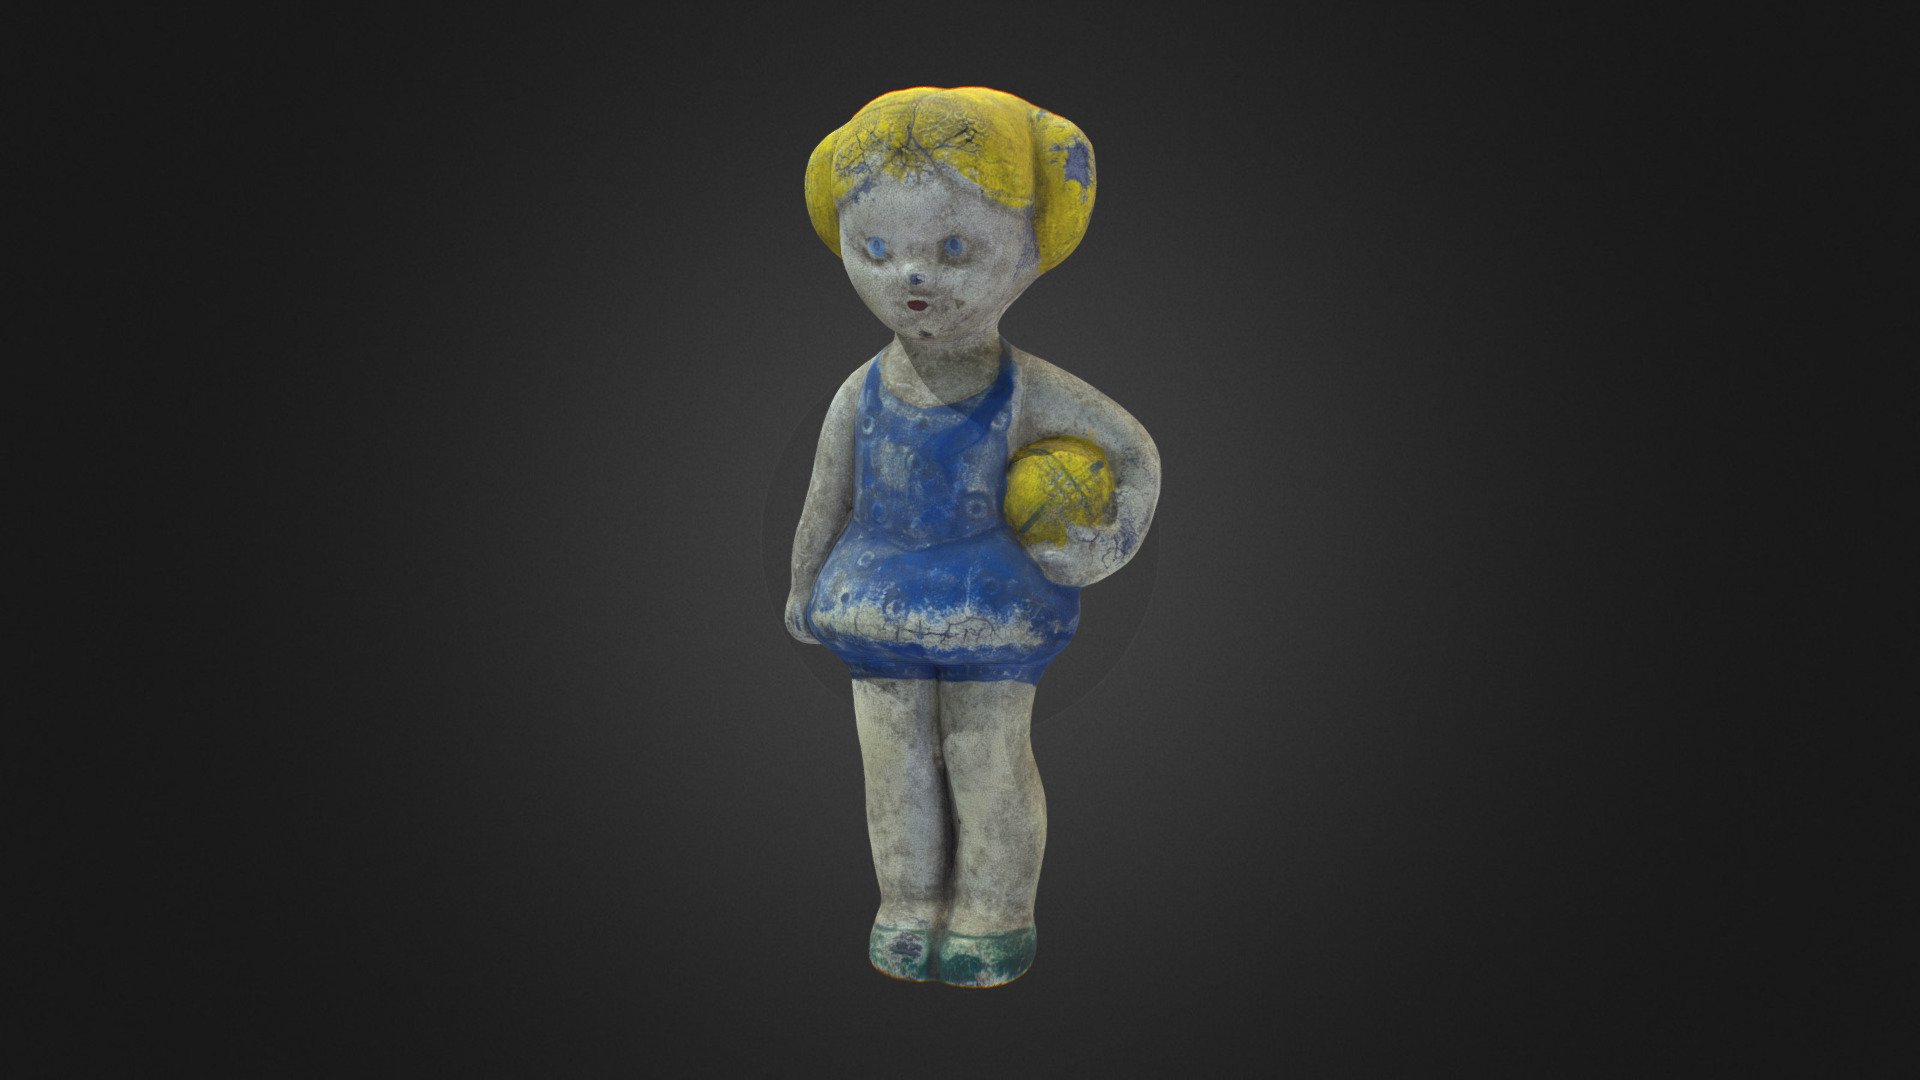 Old USSR Soviet Rubber Toy Girl with a ball Scan High Poly

Including OBJ formats and texture (8192x8192) JPG

Polygons: 50496 Triangles: 50500 Vertices: 25252 - Old USSR Soviet Rubber Toy Girl with a ball - 3D model by Skeptic (@texturus) 3d model